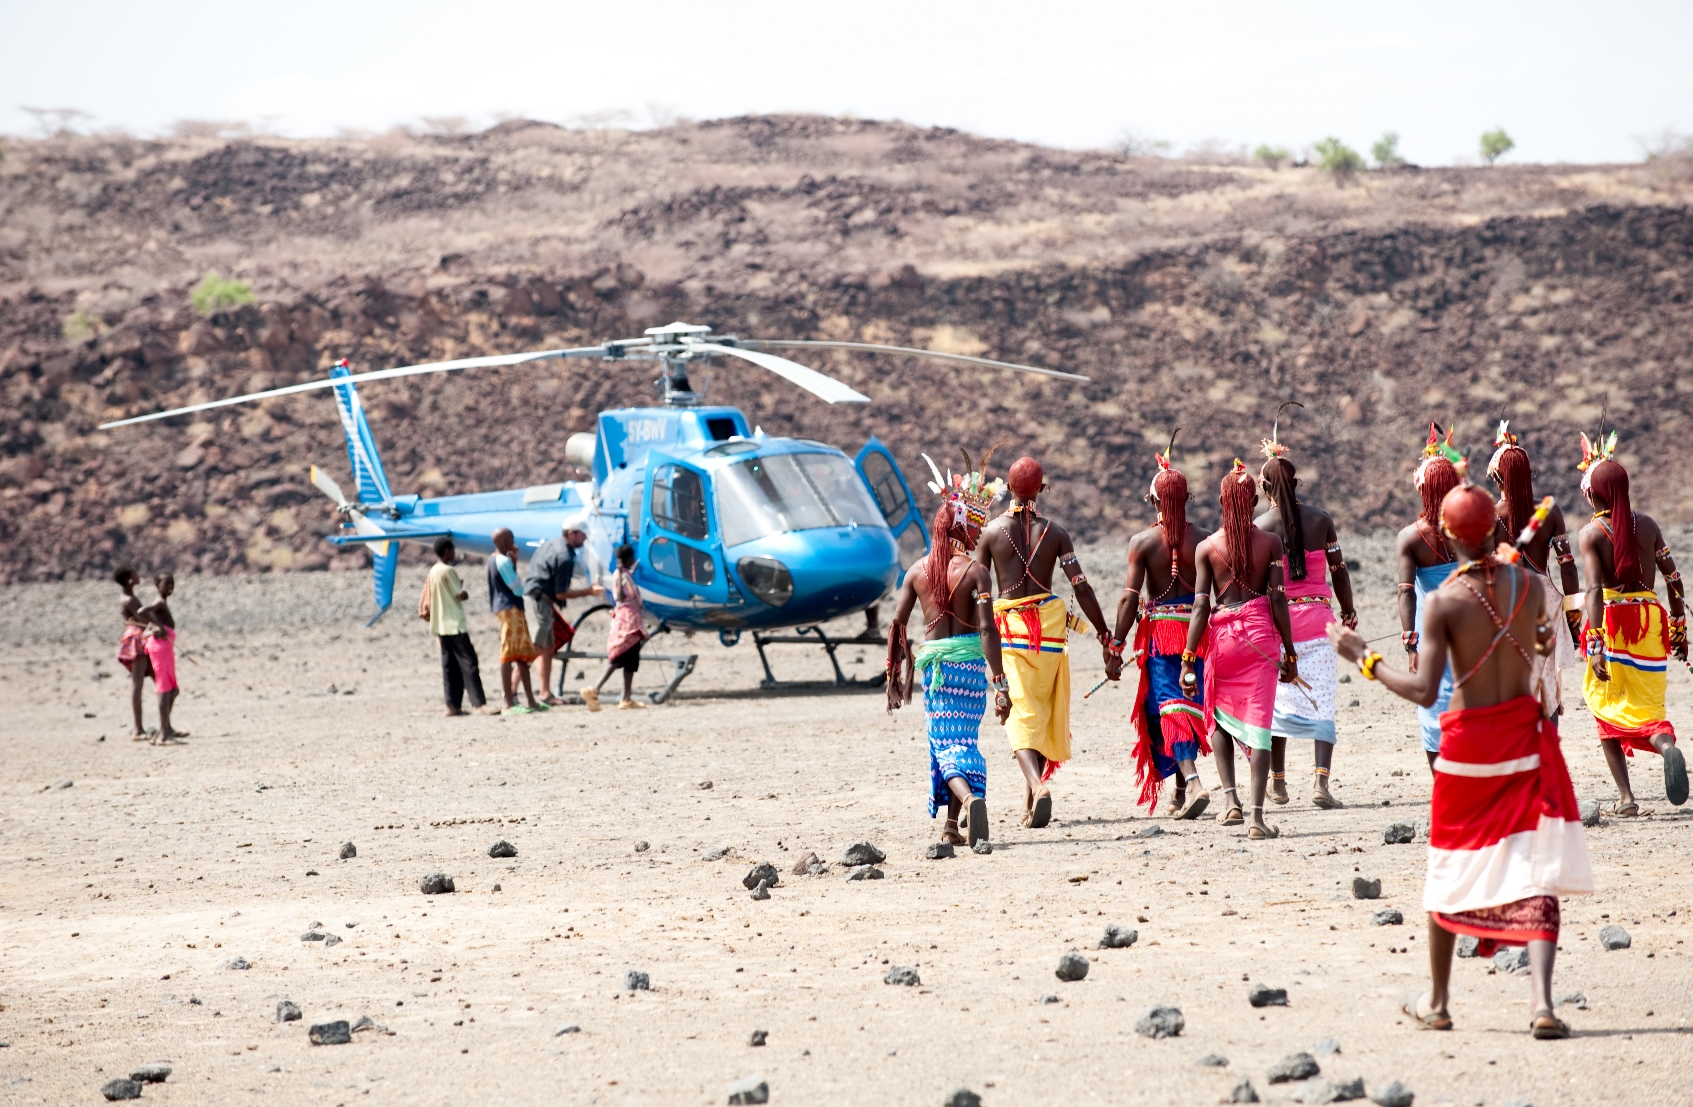 Kenyans coming to greet visting helicopter